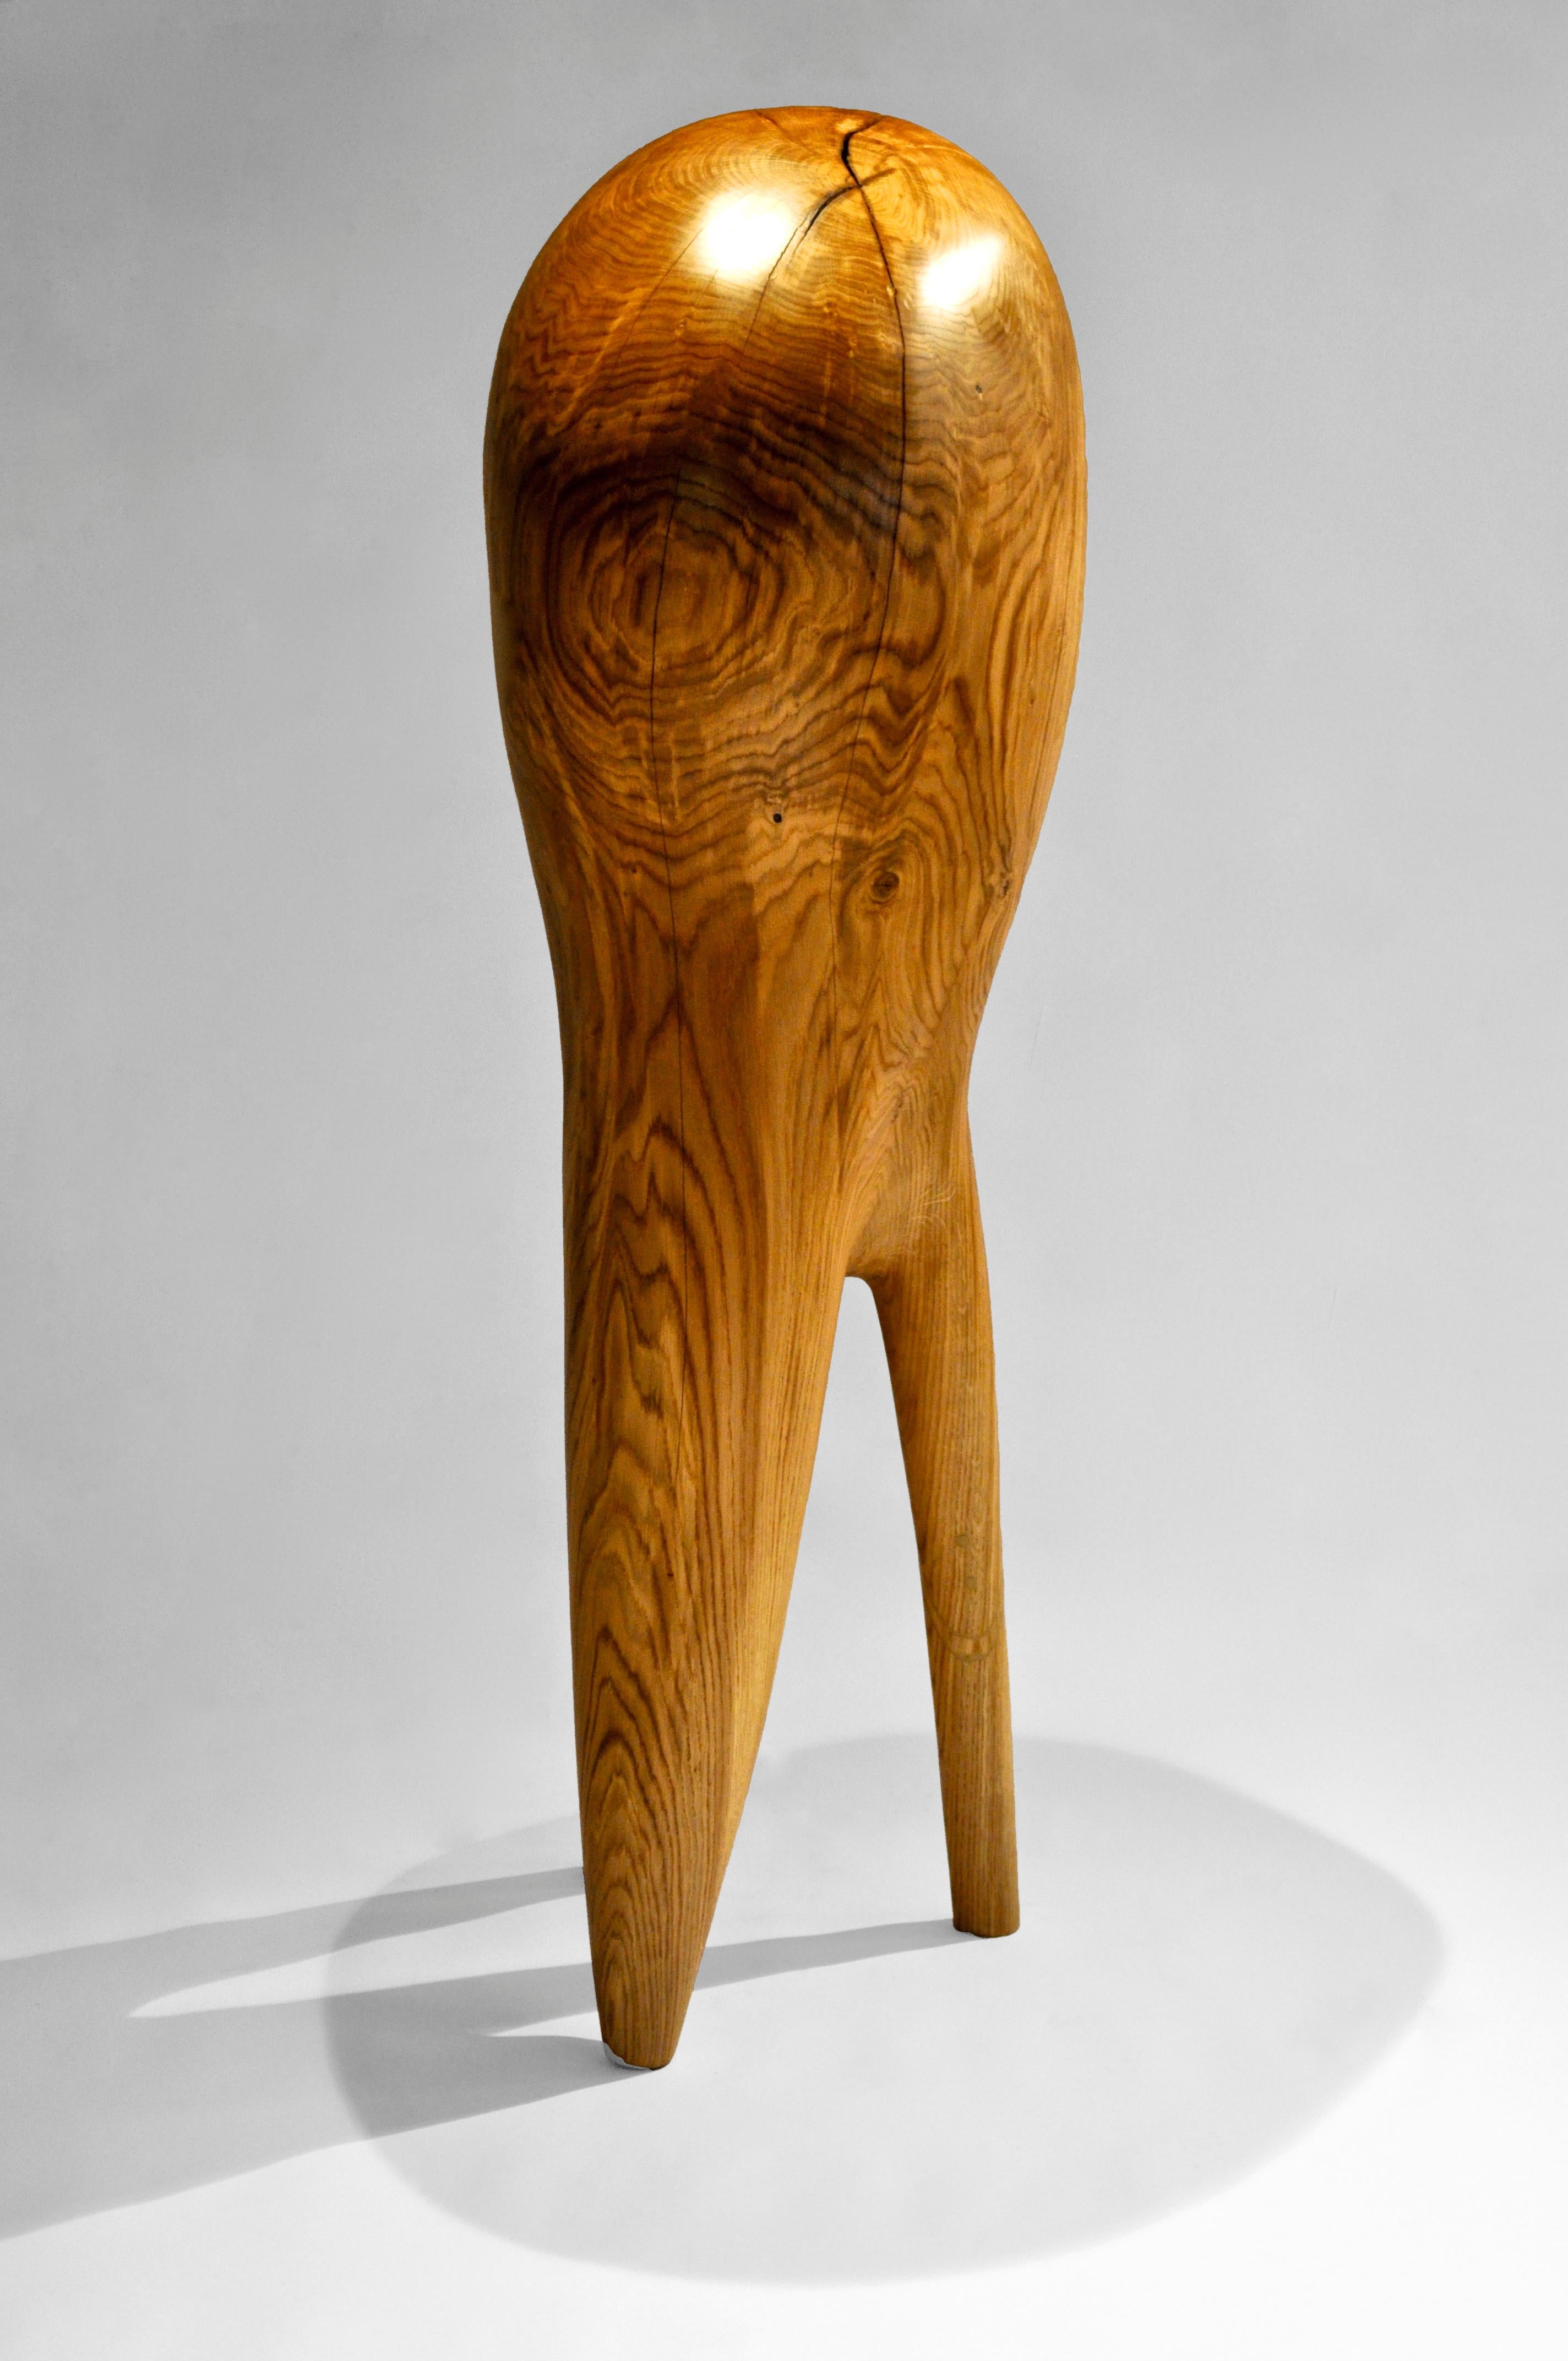 Unique oak sculpture signed by Jörg Pietschmann
Materials: Oak
Measures: H 160 x W 50 x D 48 cm 

In Pietschmann’s sculptures, trees that for centuries were part of a landscape and founded in primordial forces tell stories inscribed in the